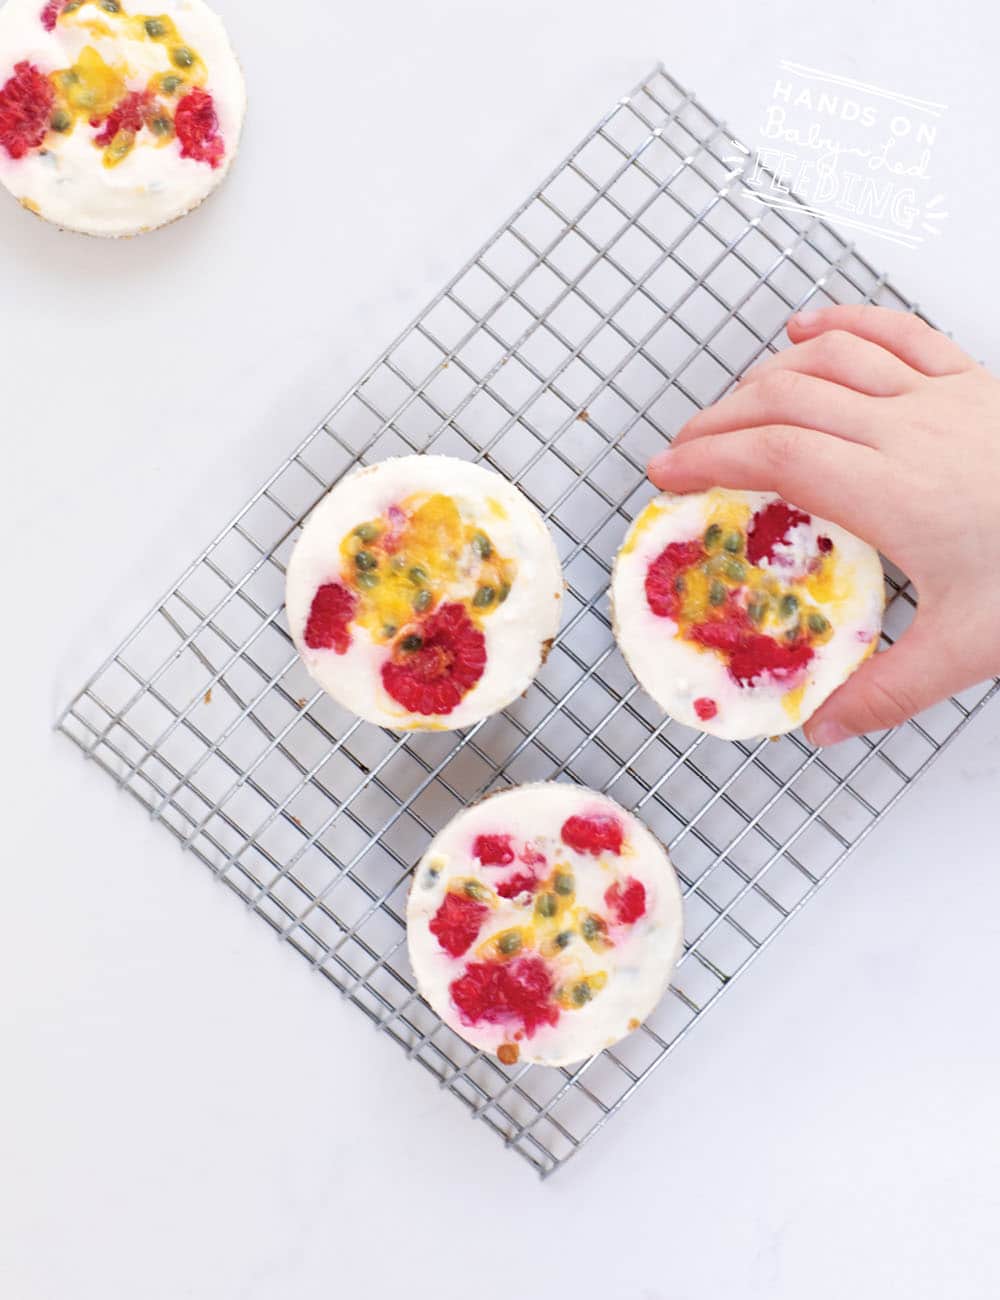 Refined Sugar Free Passion Fruit Mini Cheesecakes. A unique base made with oats, sunflower and pumpkin seeds give this delightful little finger food an extra boost of protein. Make ahead and freeze for an easy party snack or sweet treat. #babyledfeeding #babyledweaning #cheesecake